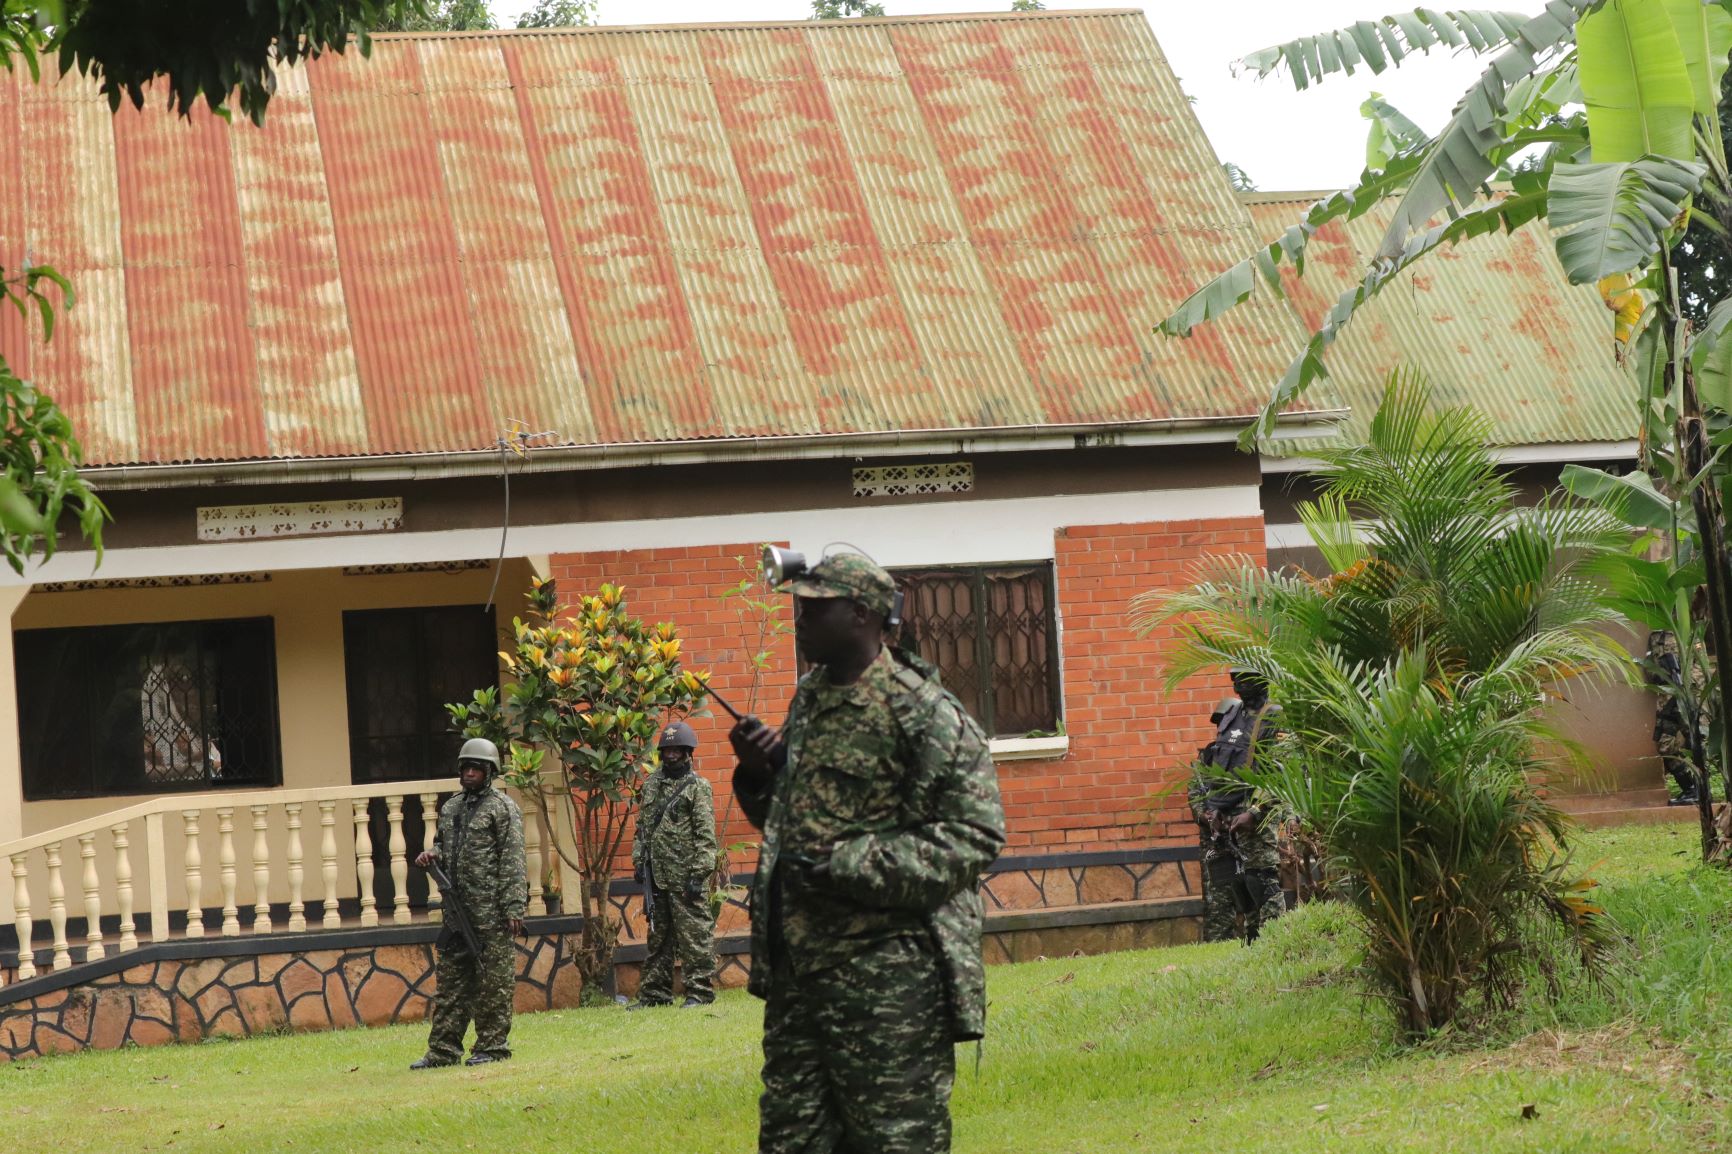 Four suspected bombs recovered in Komamboga house